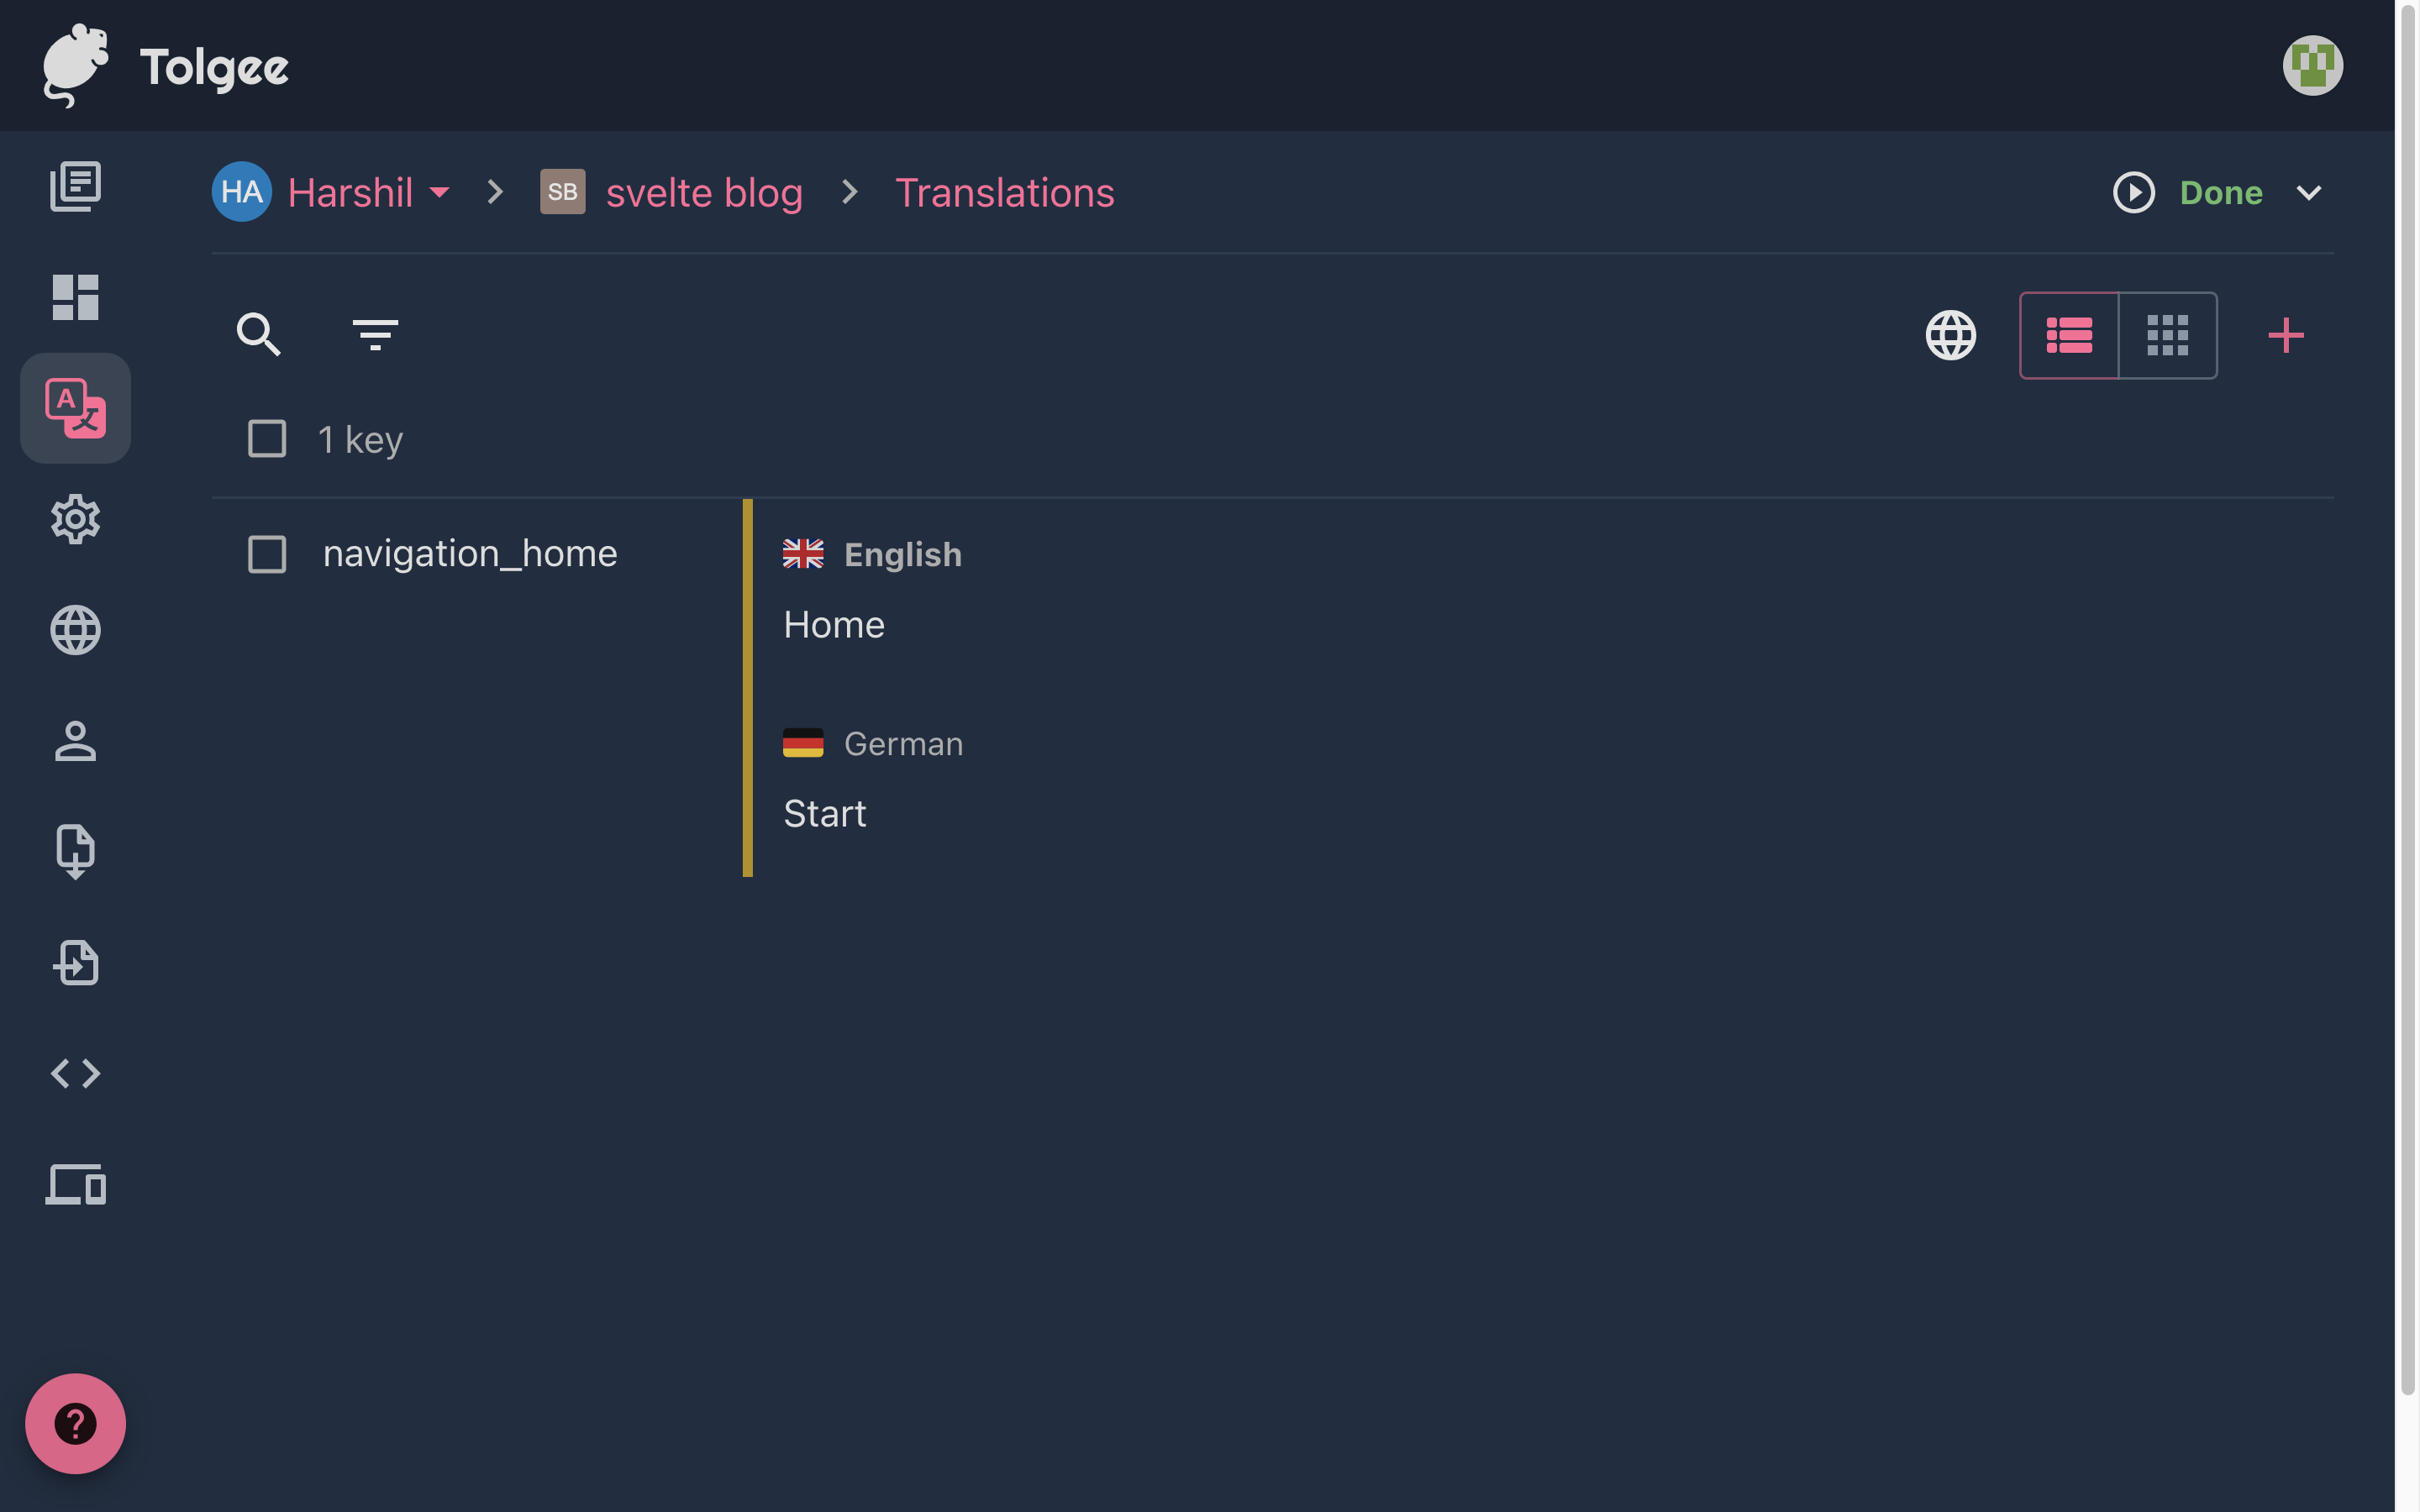 Screenshot showing the new created naviation_home key on the Tolgee platform